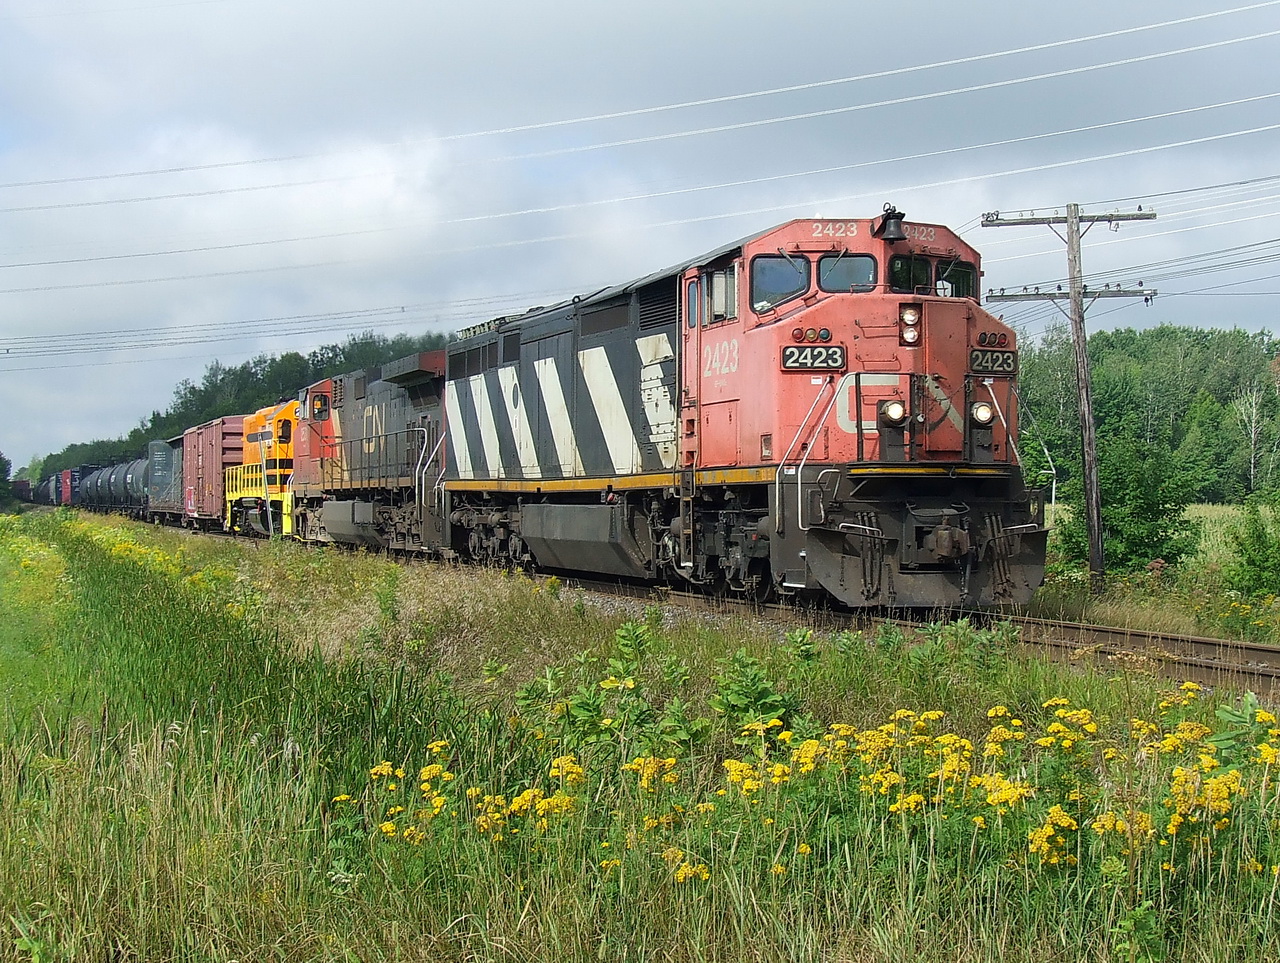 CN 310 on its way to Joffre yard at track speed with 2531 and QG 2303 trailing.